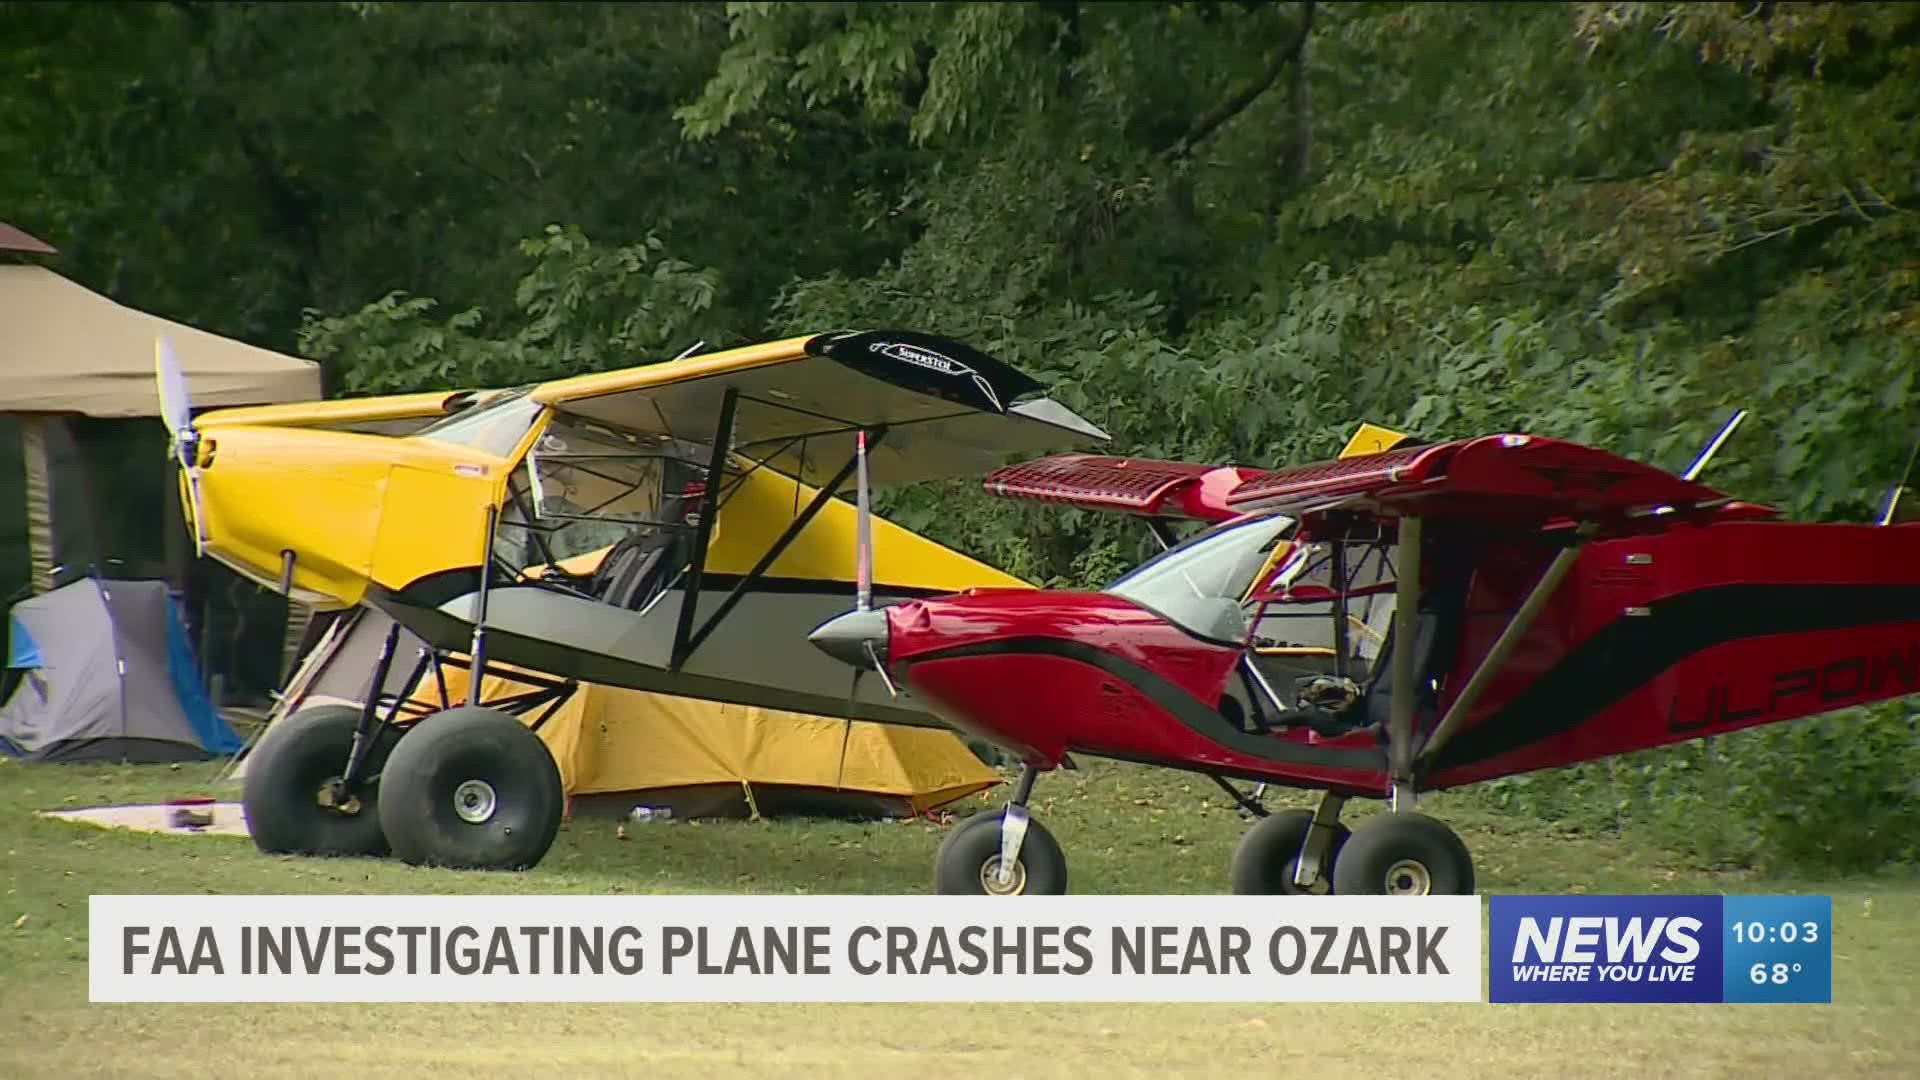 The FAA is investigating a plane crash resulting in the pilot being airlifted but competition organizers say they followed safety precautions when hosting the event.